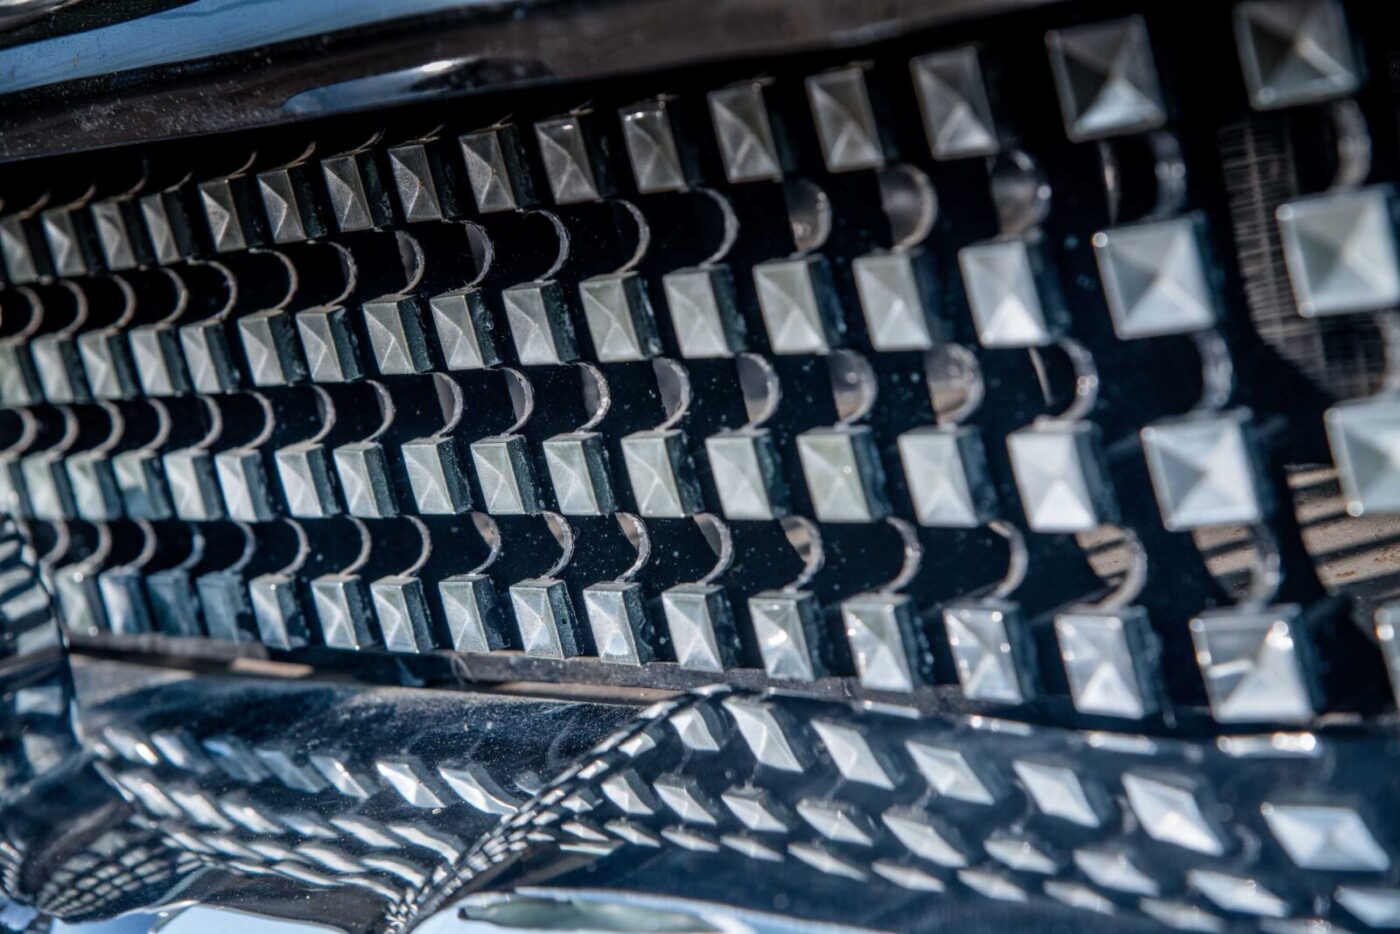 Buick Century grille